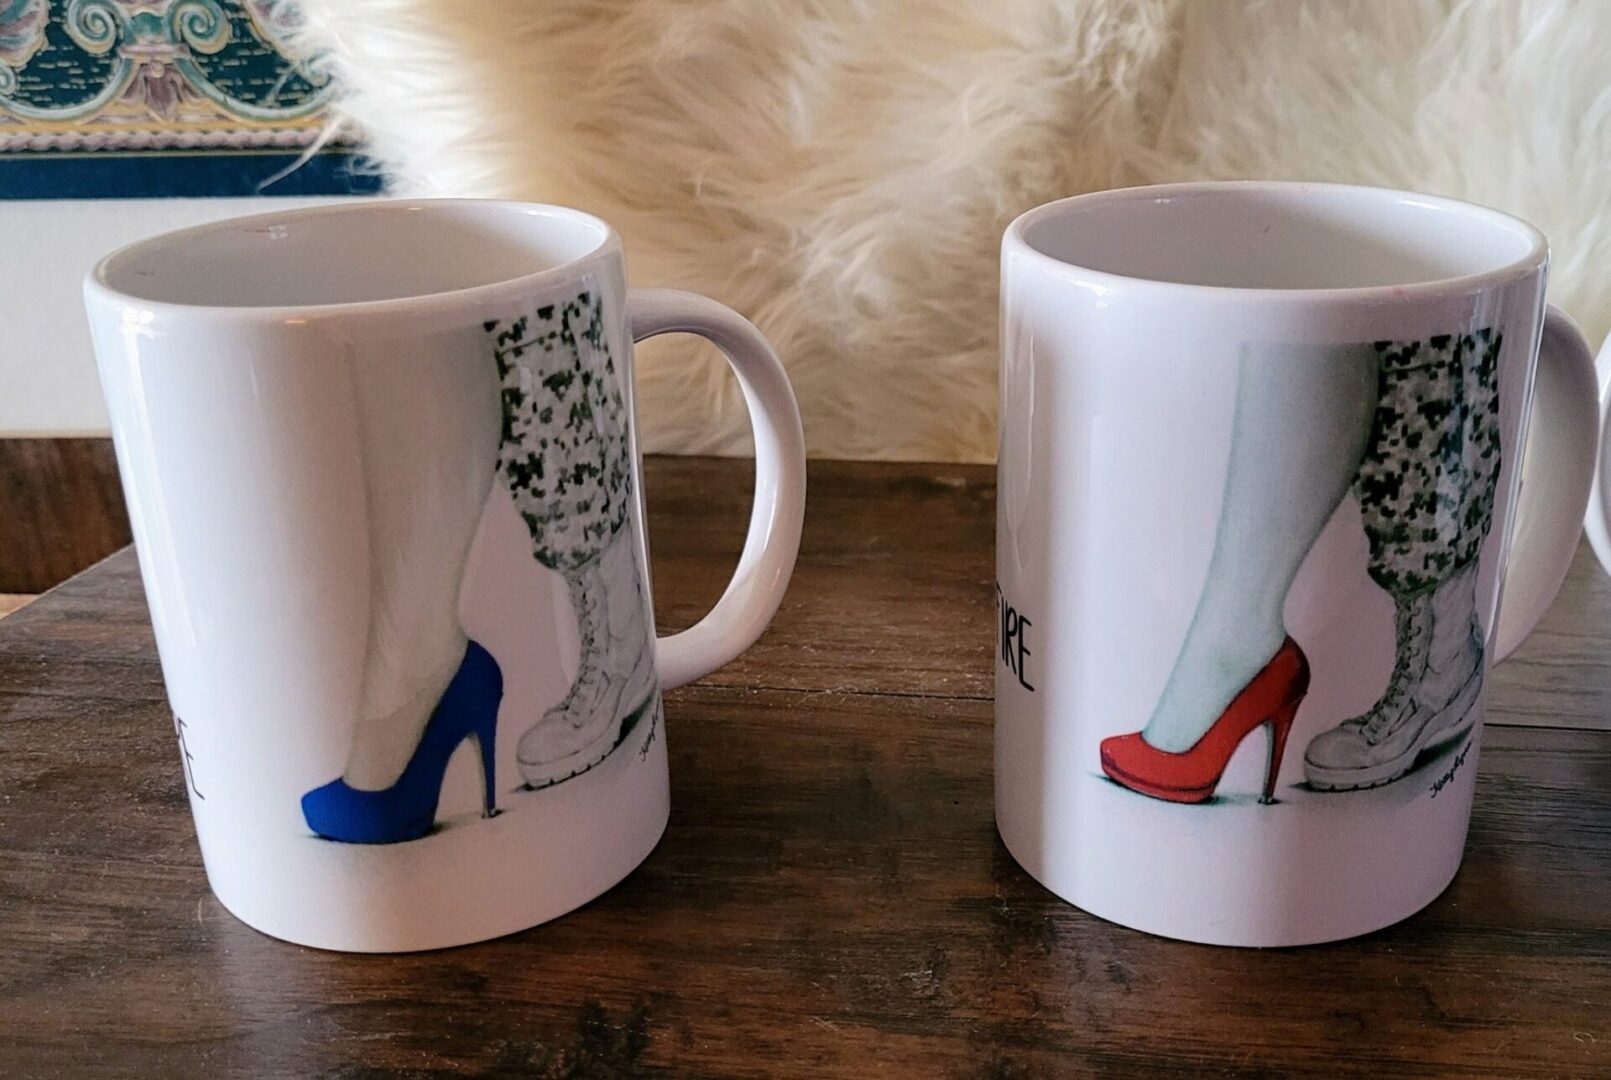 Two "The Transition" series 15 Oz Coffee Mugs on a wooden table, each featuring a graphic of a woman's legs wearing different colored high heels, one blue and one red.